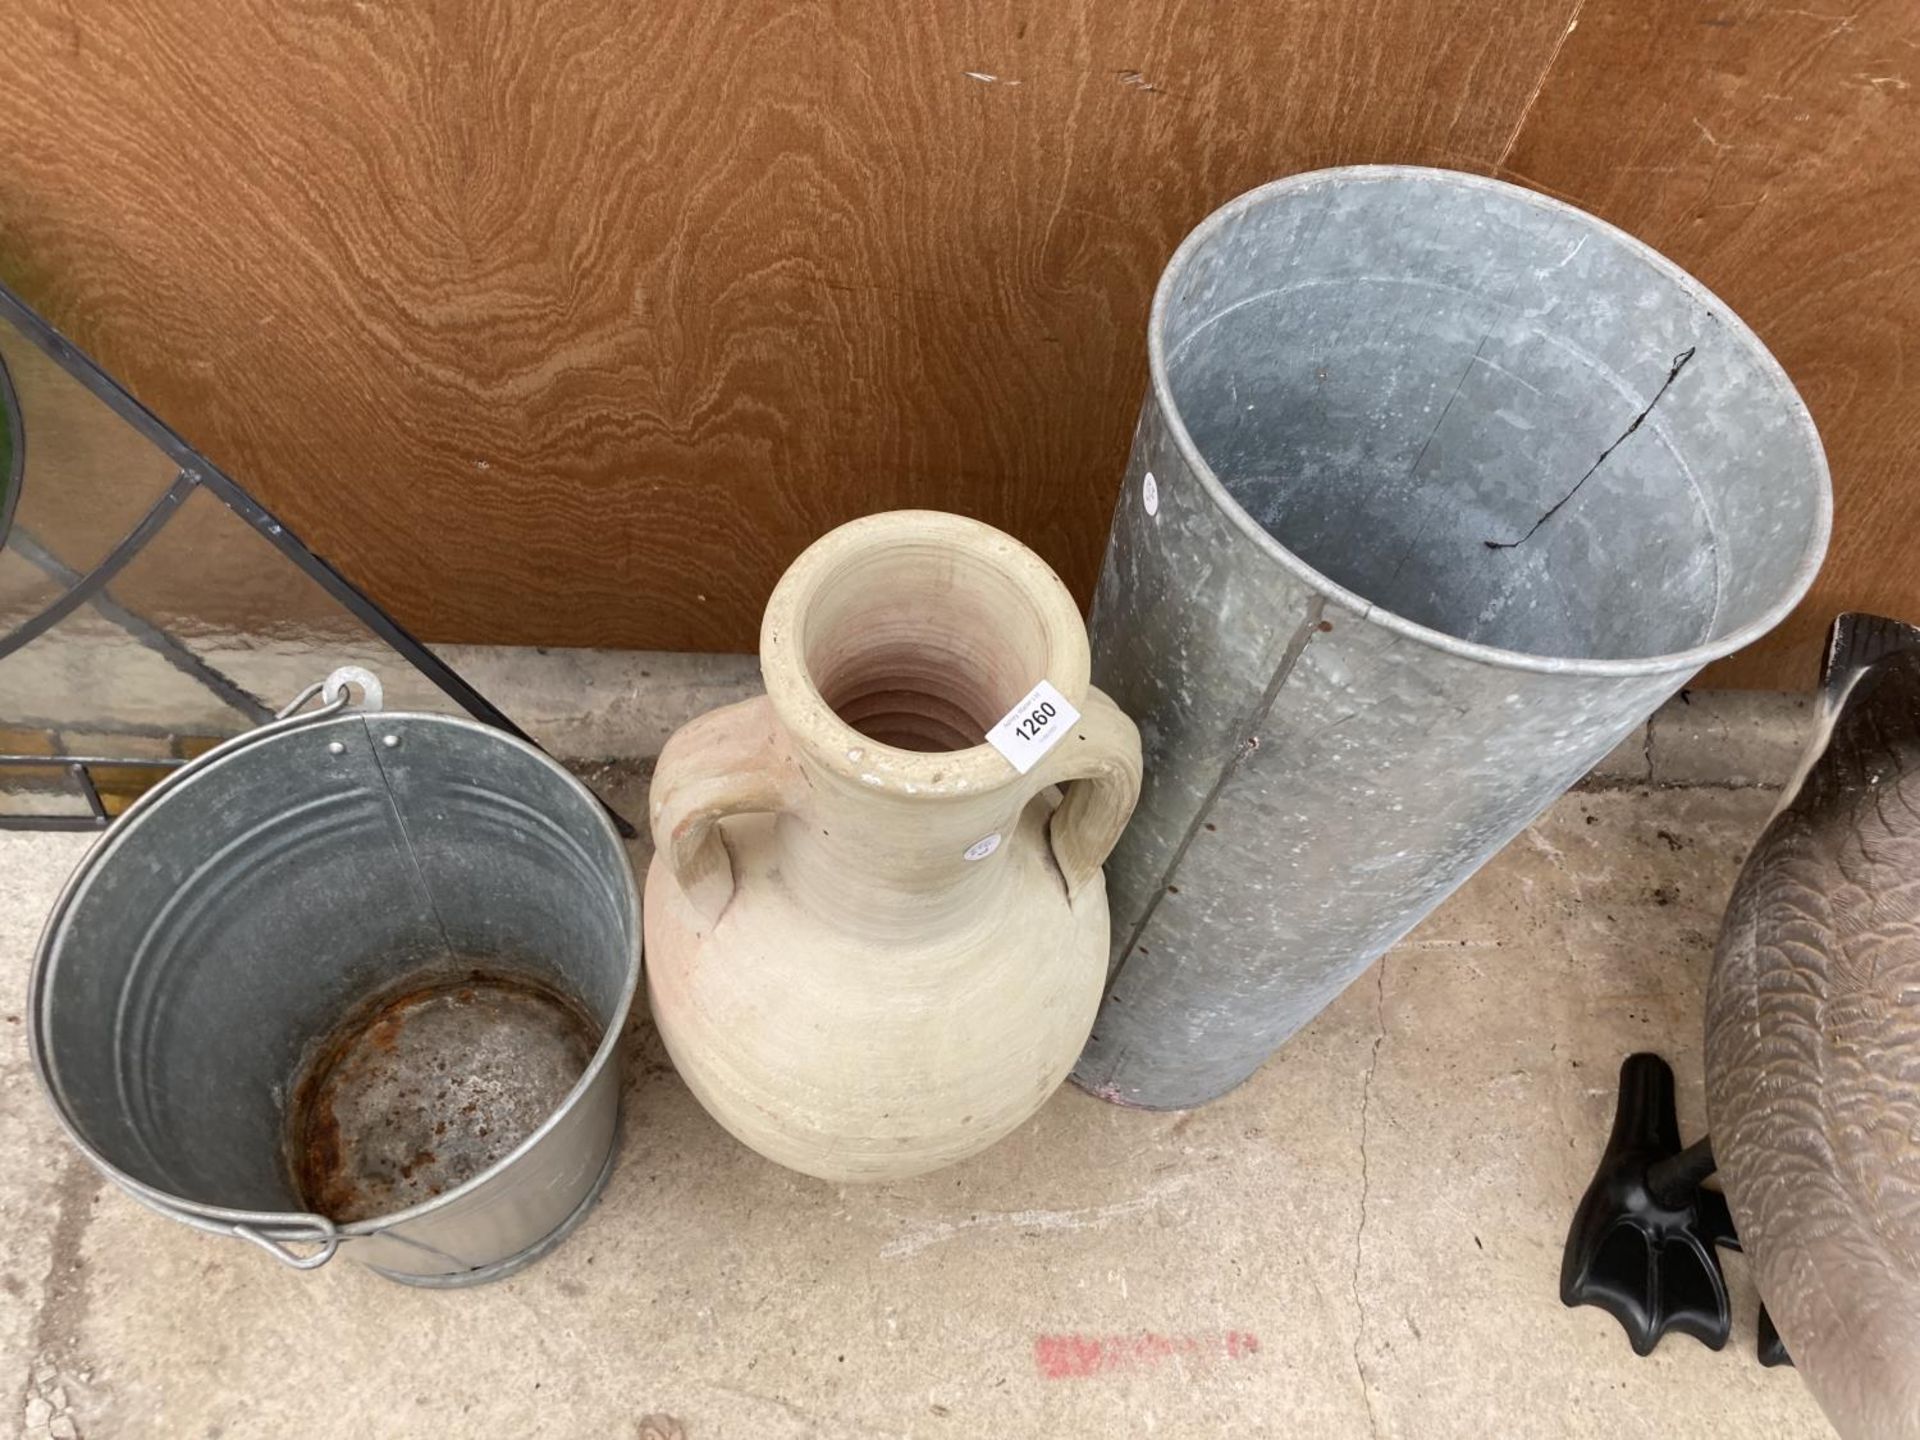 TWO GALAVANISED BUCKETS AND A CERAMIC URN VASE - Image 4 of 10